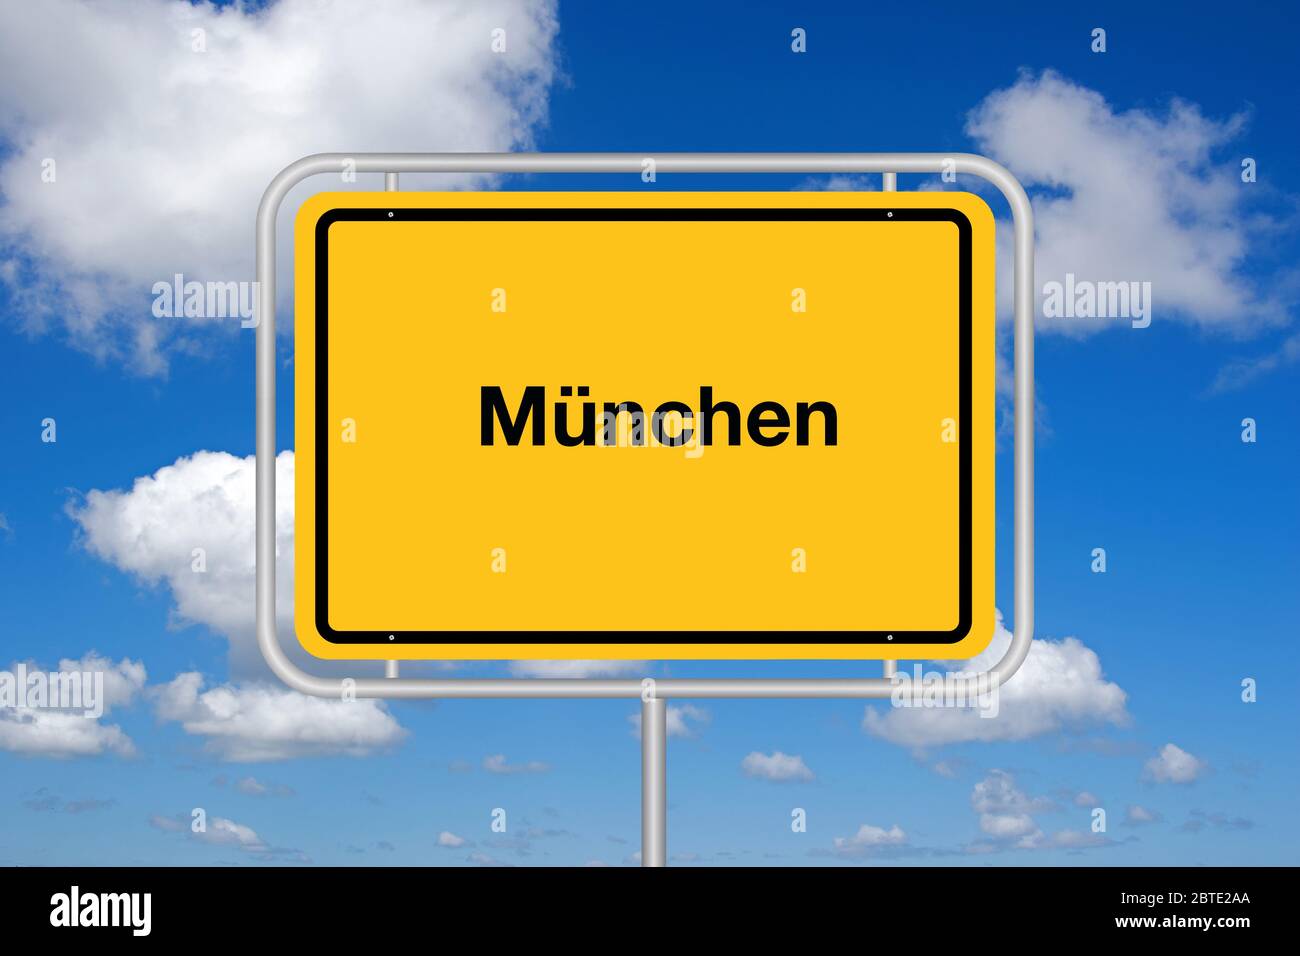 sity sign Muenchen against blue sky, Germany, Bavaria, Muenchen Stock Photo